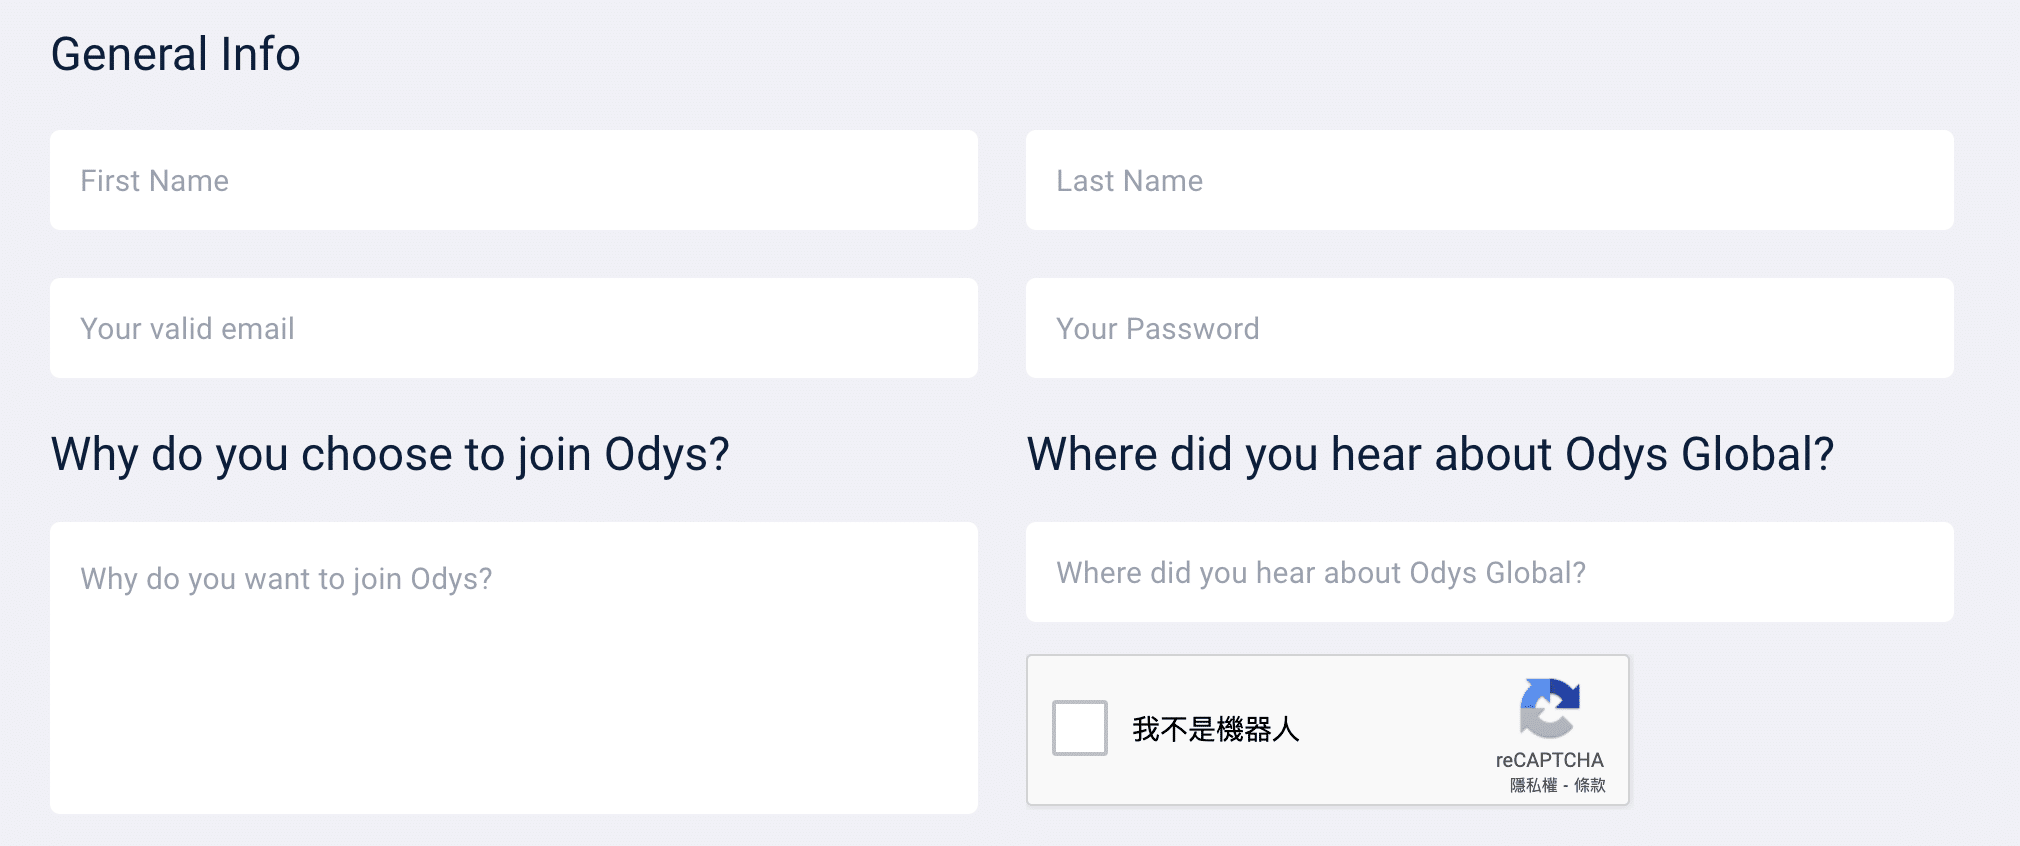 request access to Odys Global